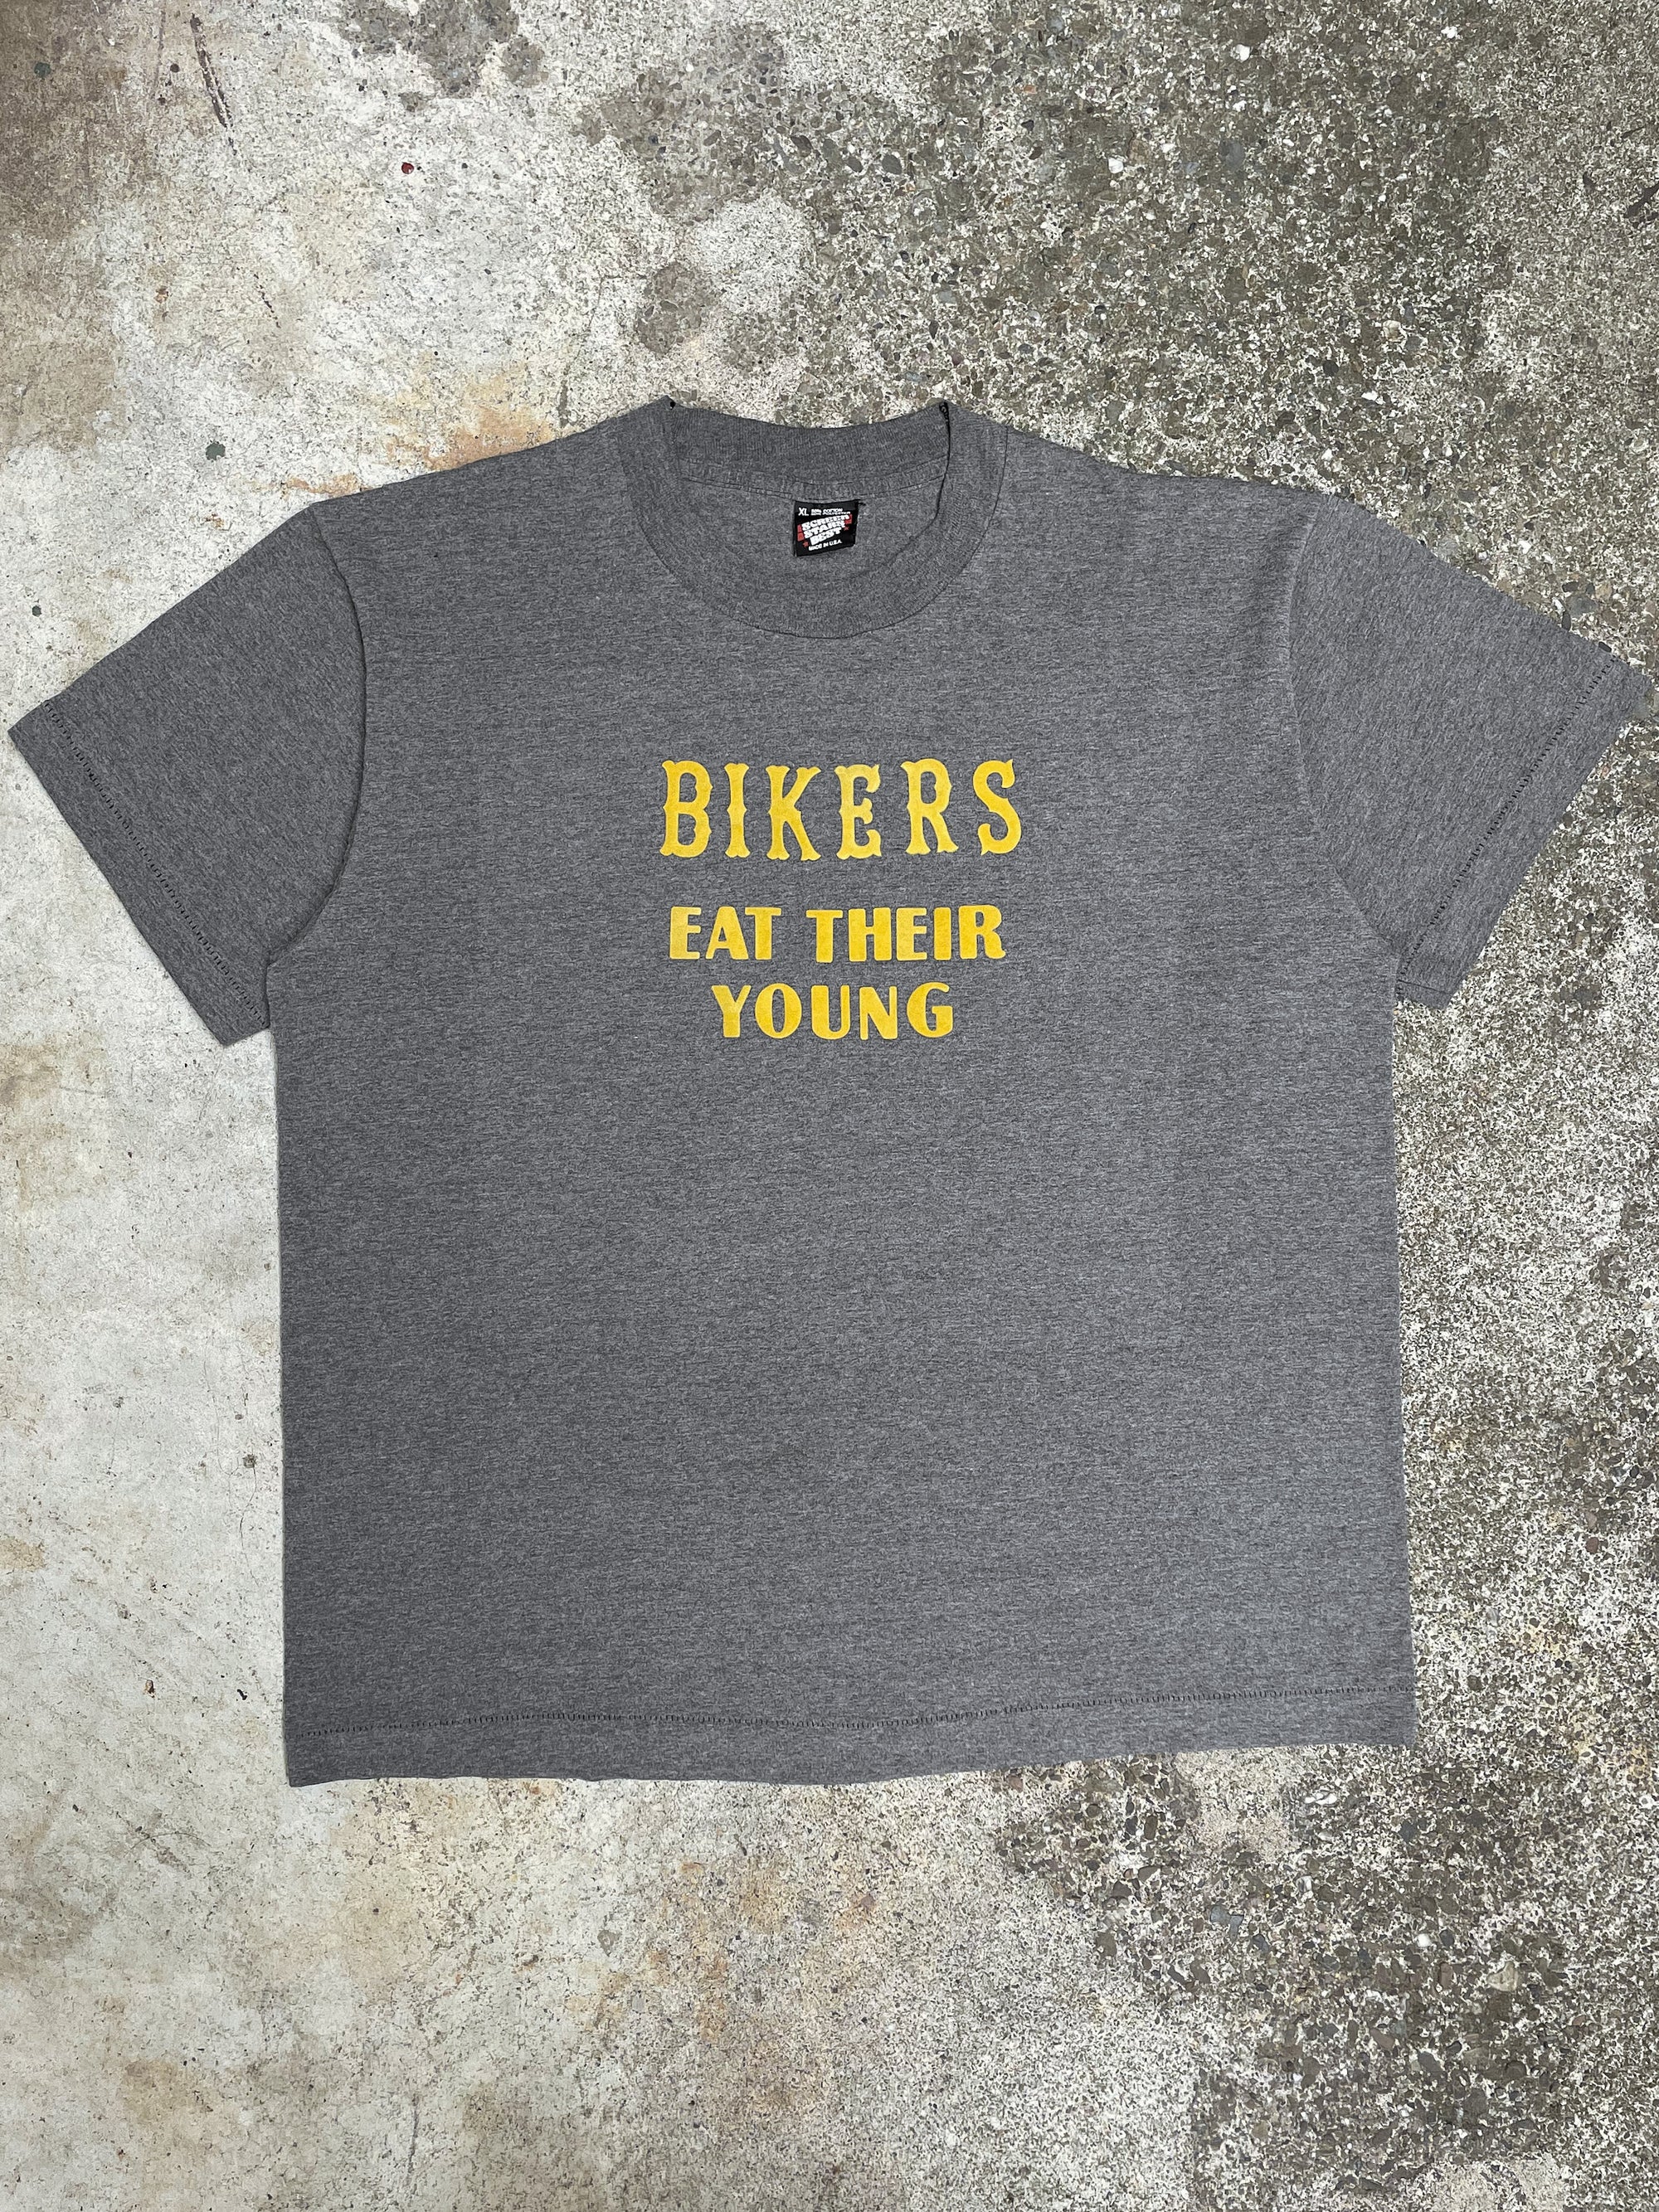 1990s “Bikers Eat Their Young” Tee (XL)